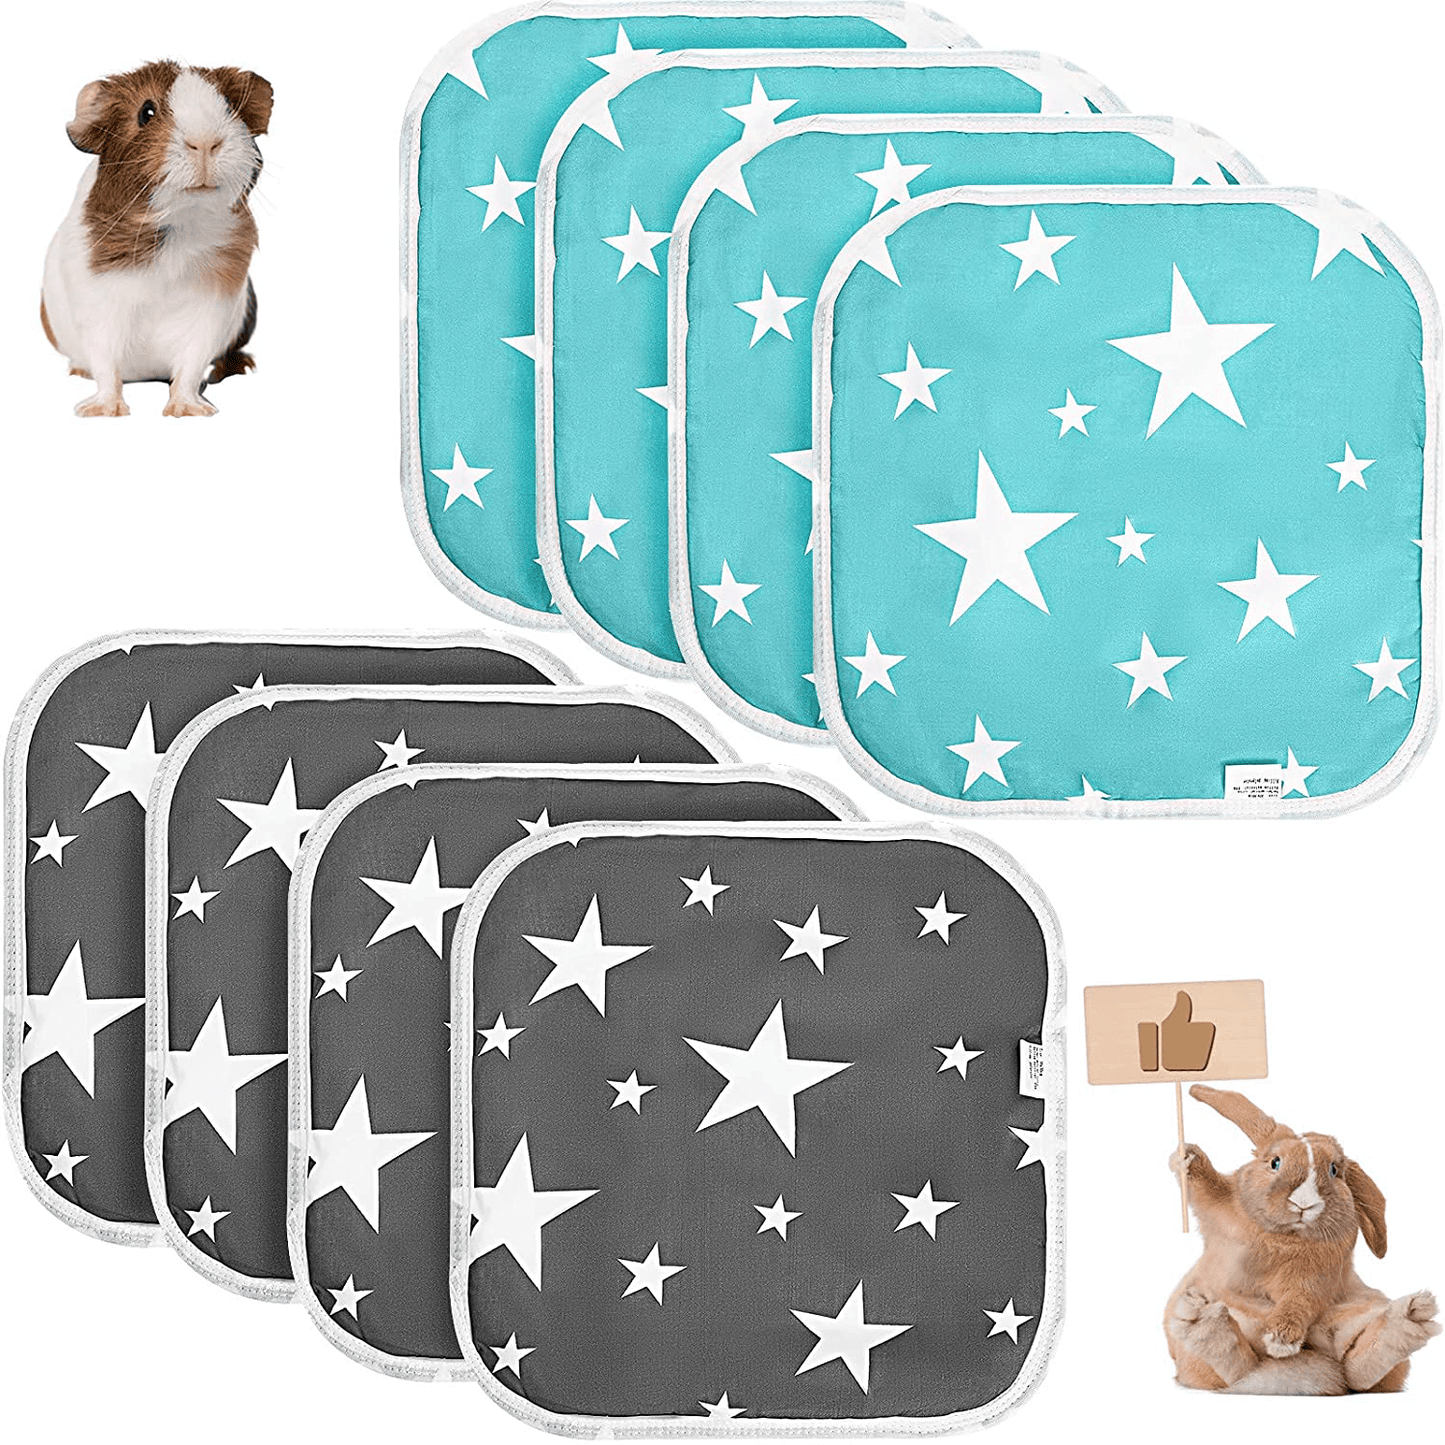 8 Pieces Guinea Pig Cage Liners Guinea Pig Bedding Highly Absorbent Washable and Reusable Small Animal Pee Pads Bedding Pet Training Pads for Small Animals Hamsters Bunnies, 12 X 12 Inch